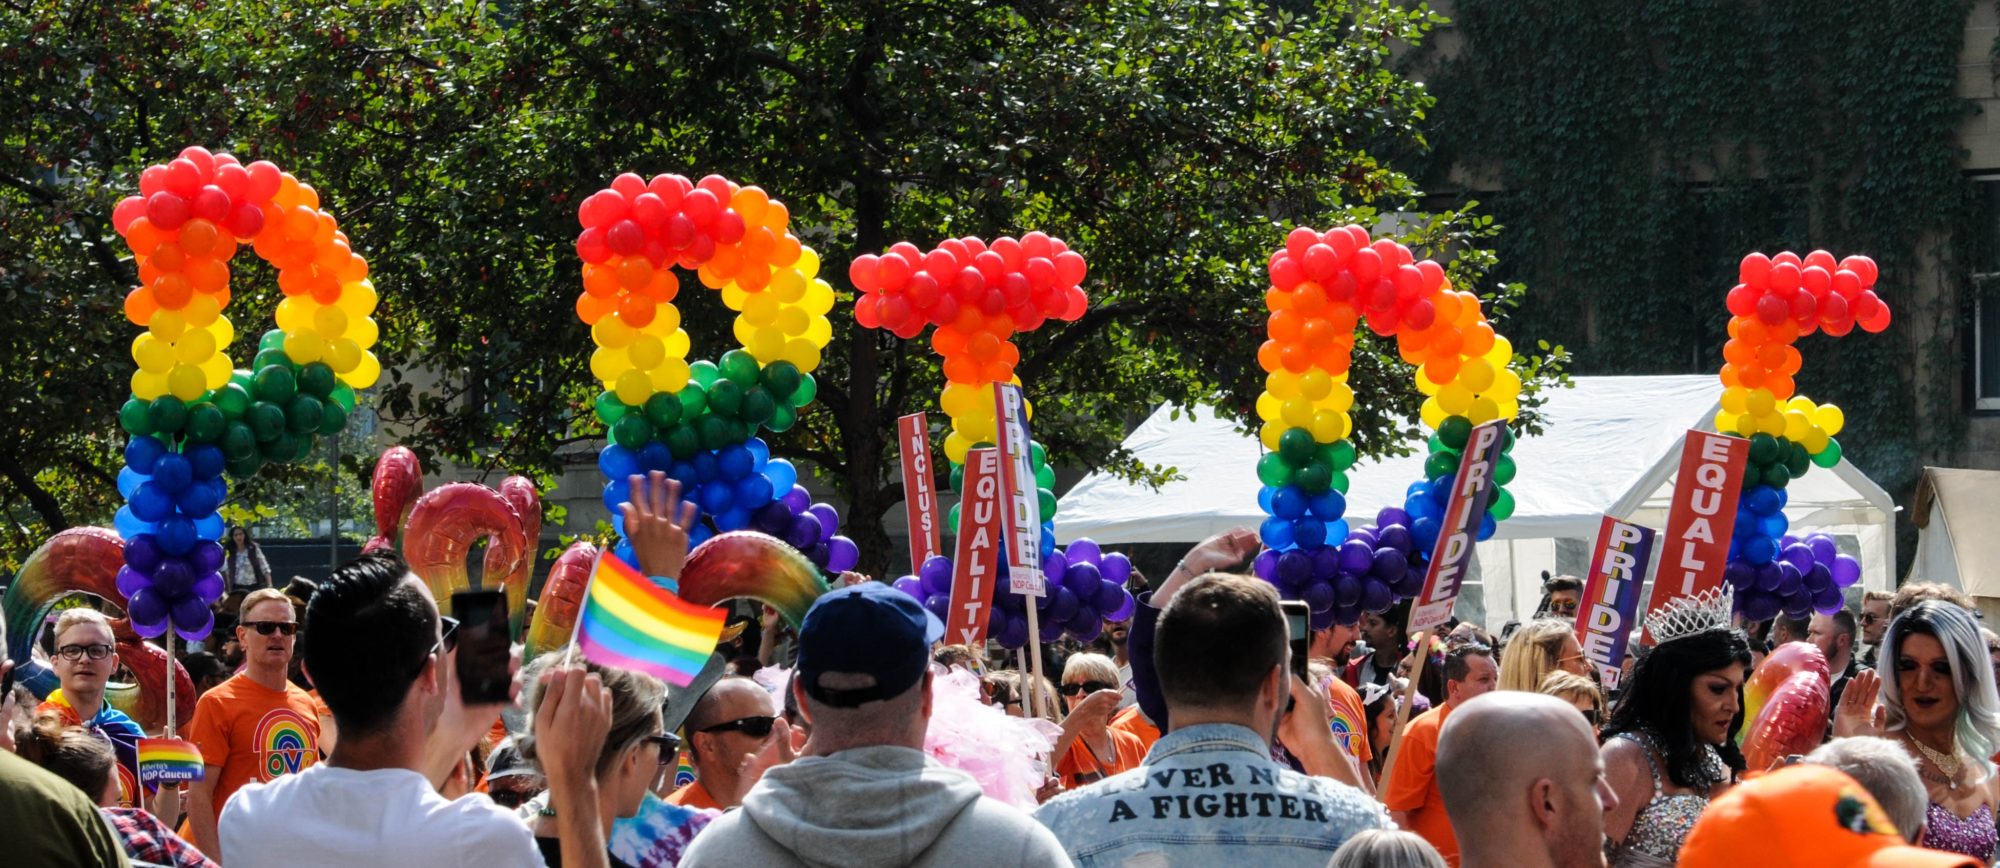 Gay pride celebration with rainbow balloons